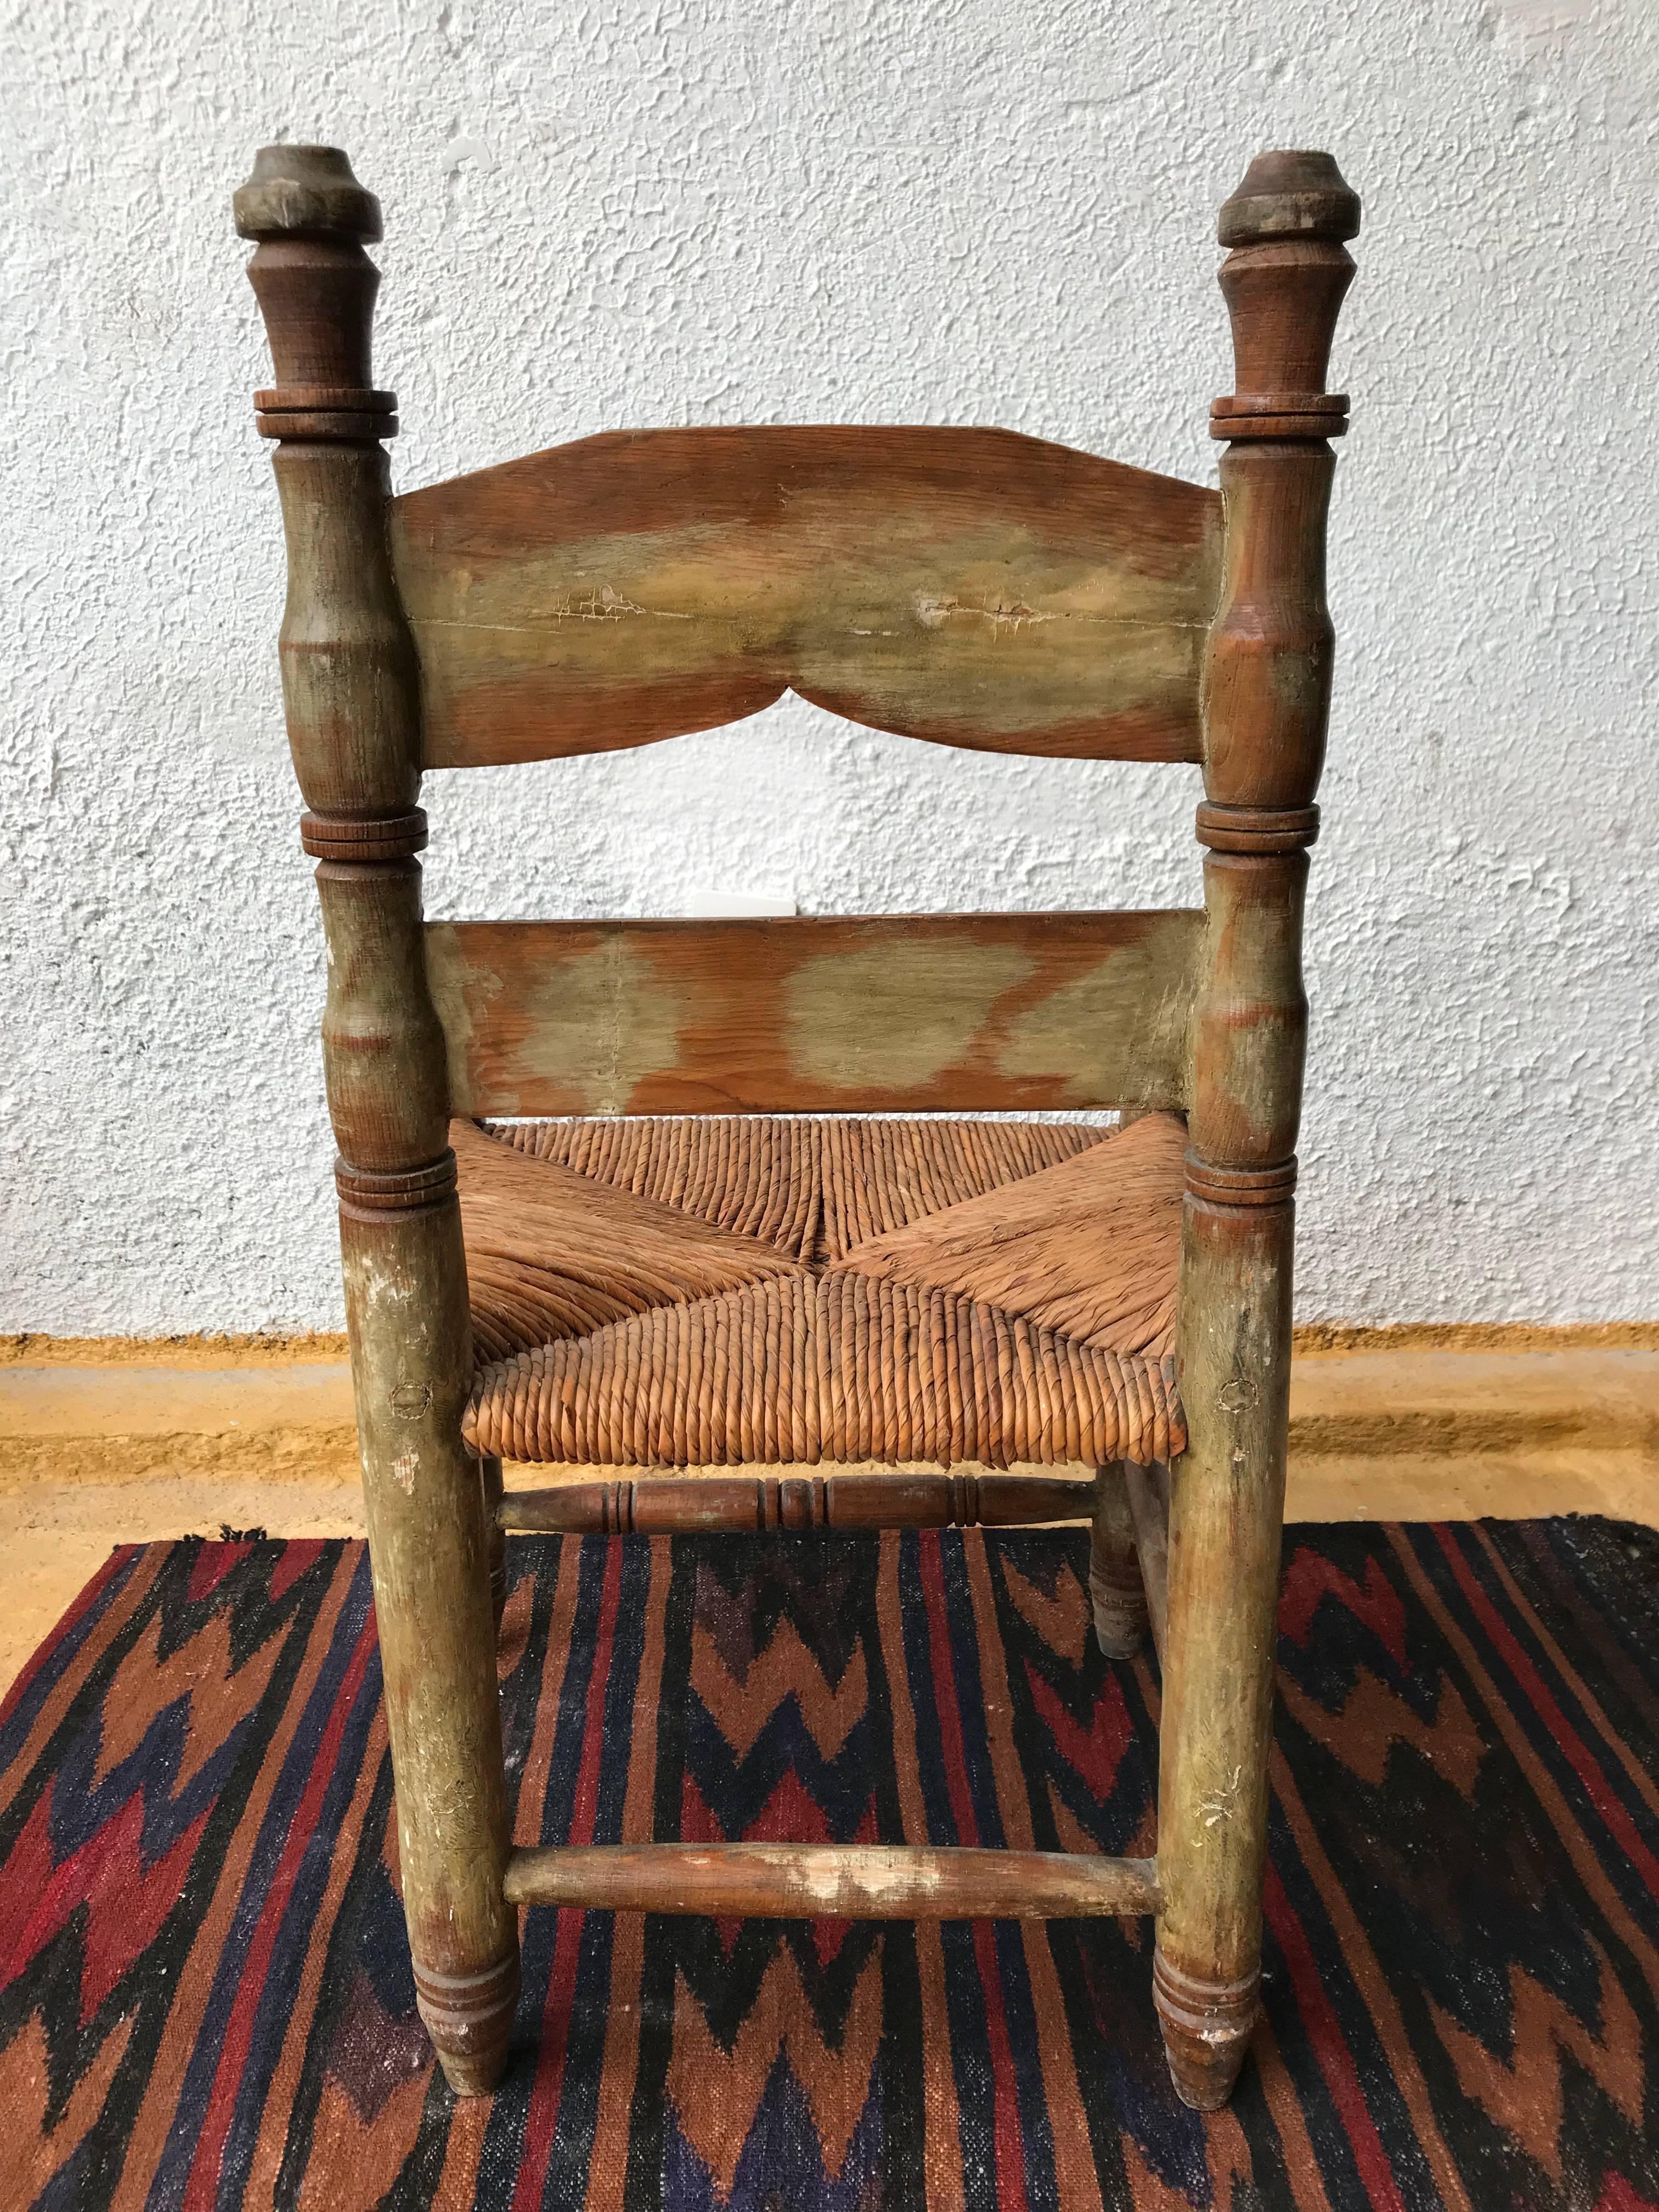 19th Century Set of Six Antique Wood Chairs found in Zacatecas, México, circa 1900